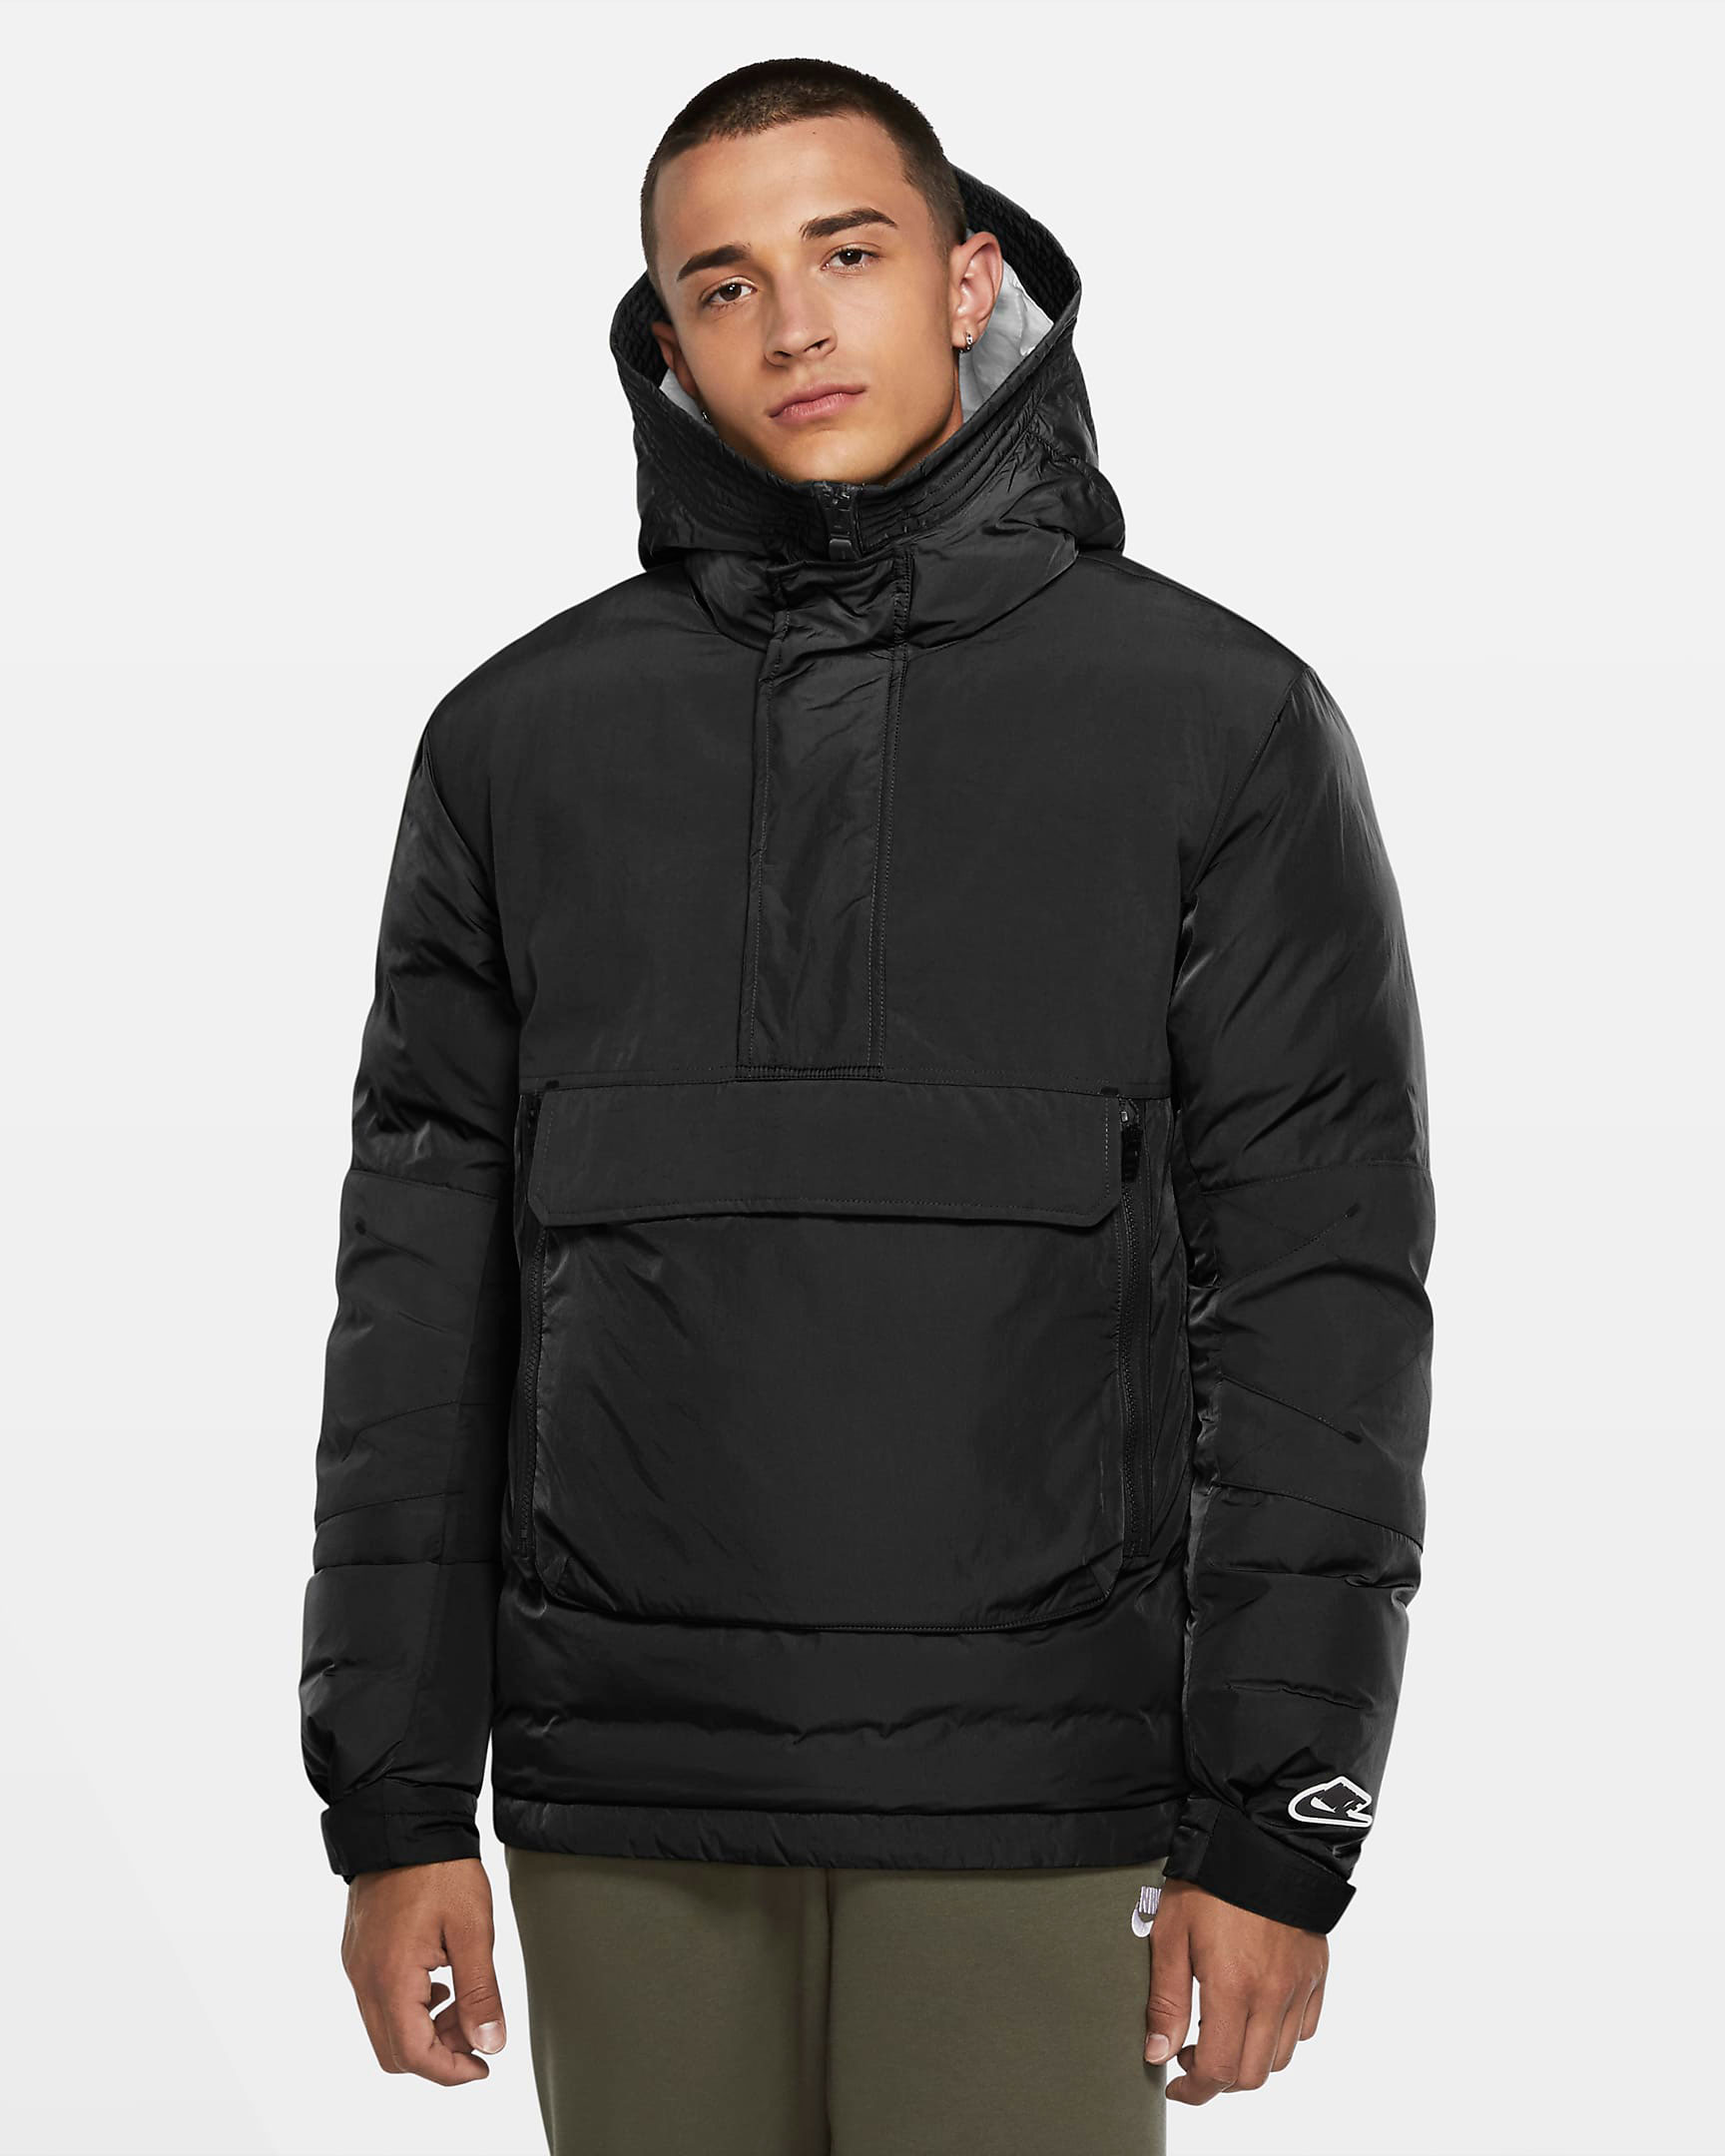 nike-foamposite-one-black-anthracite-winter-jacket-match